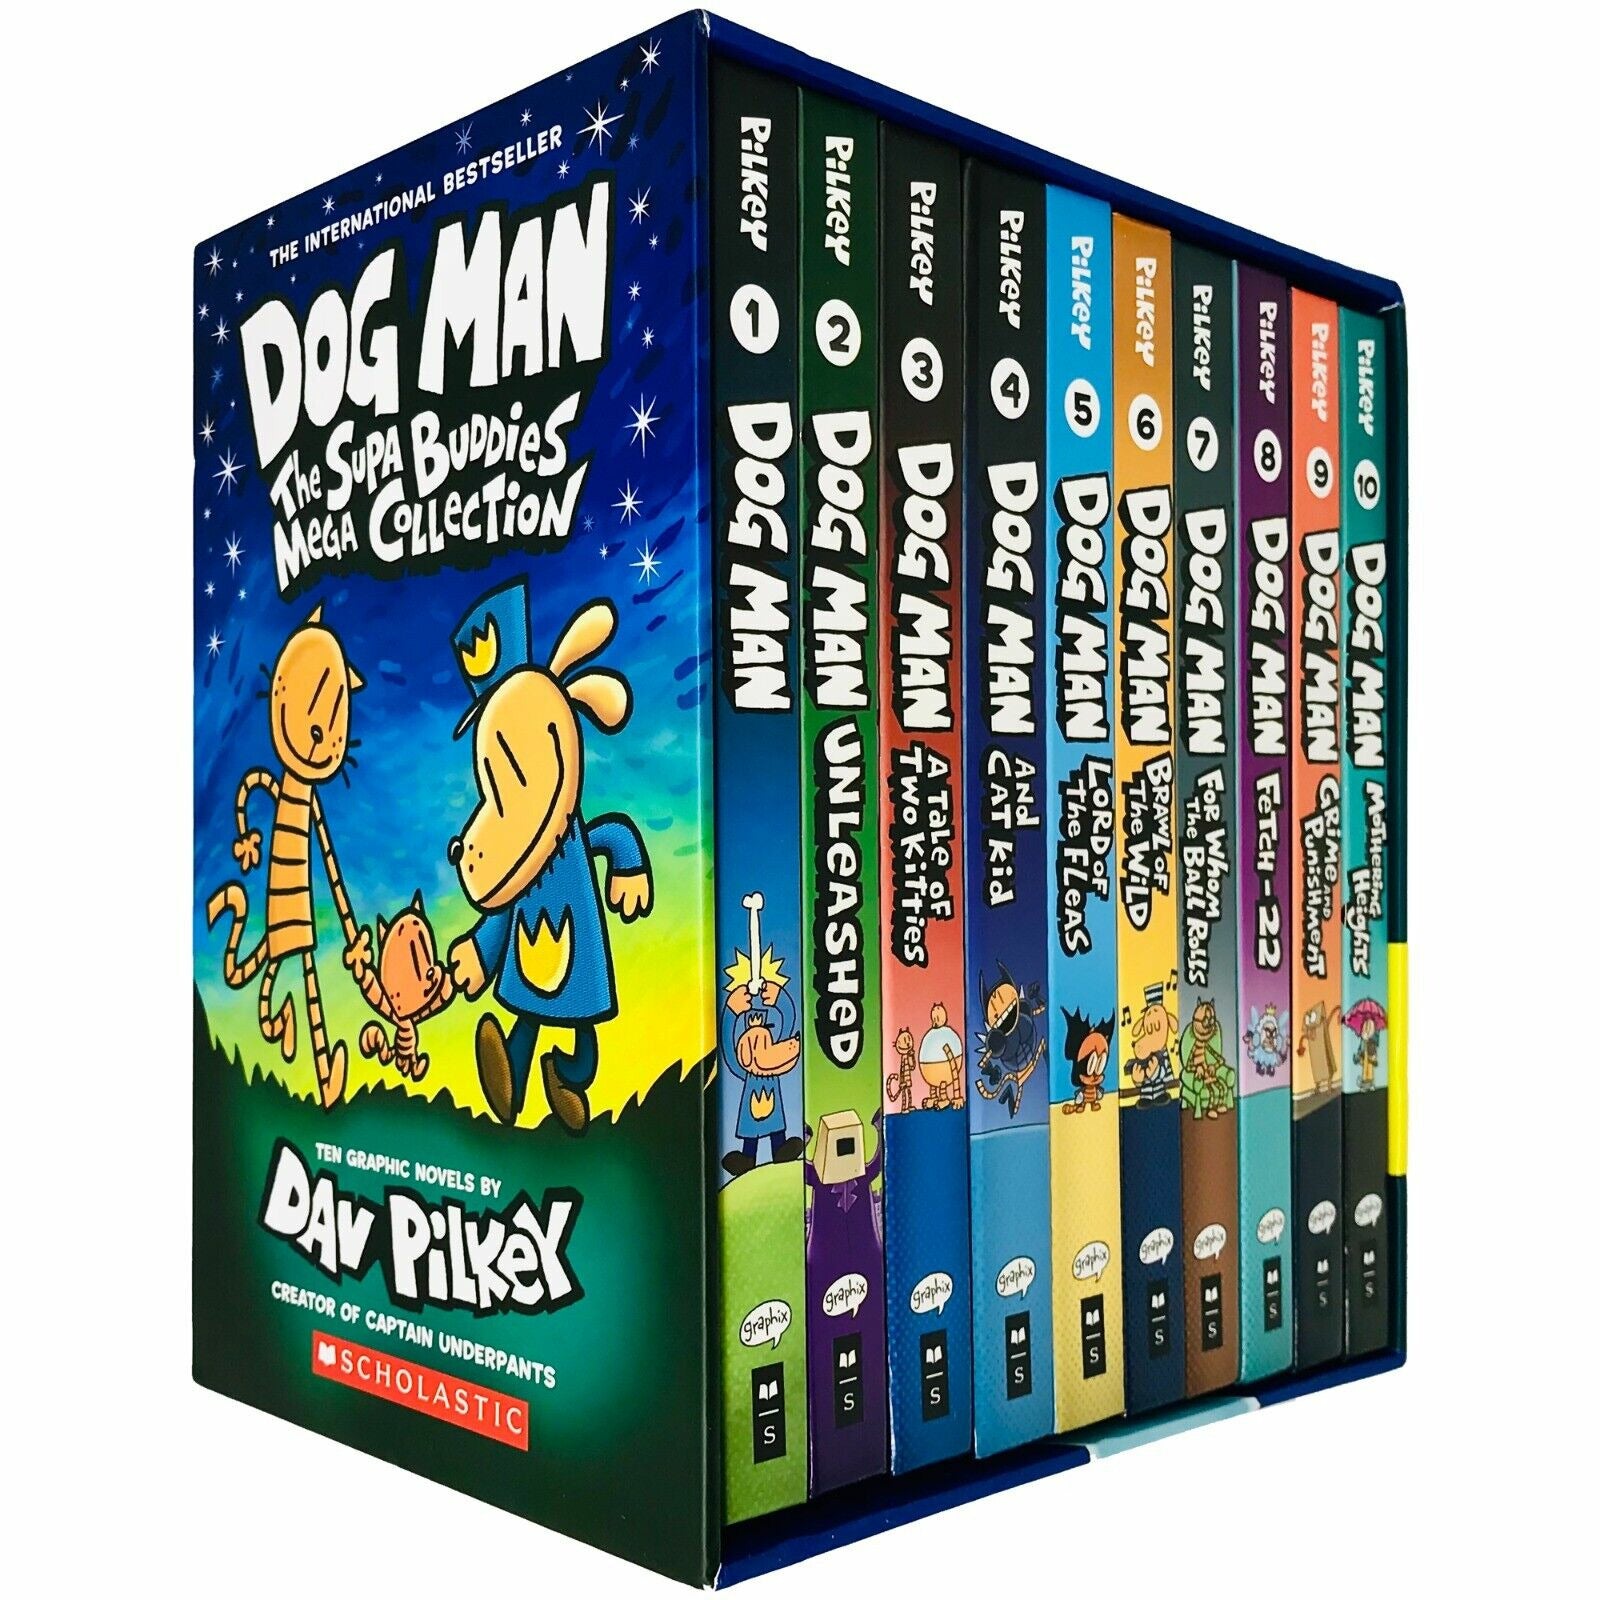 Dog Man: The Supa Buddies Mega Collection: From the Creator of Captain  Underpants (Dog Man #1-10 Boxed Set) - by Dav Pilkey (Paperback)